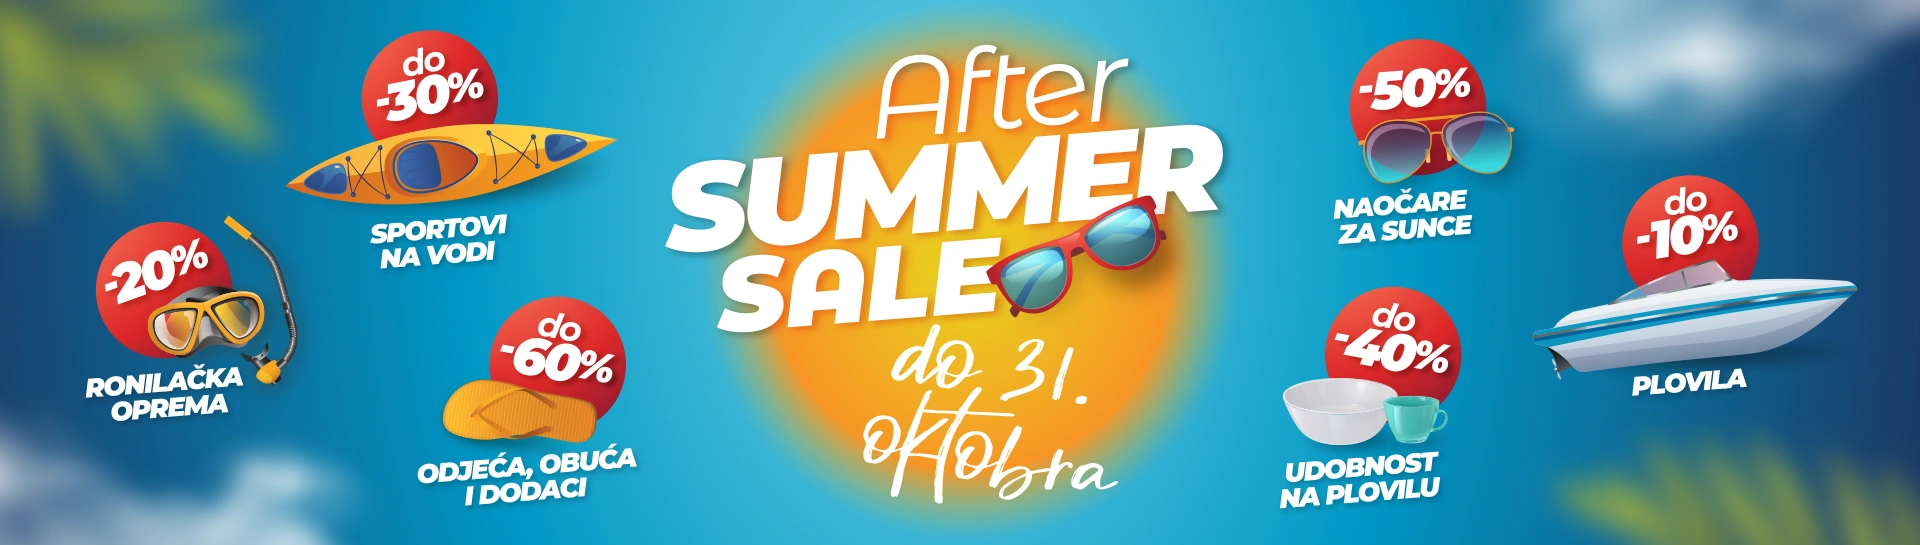 After Summer Sale popusti discount